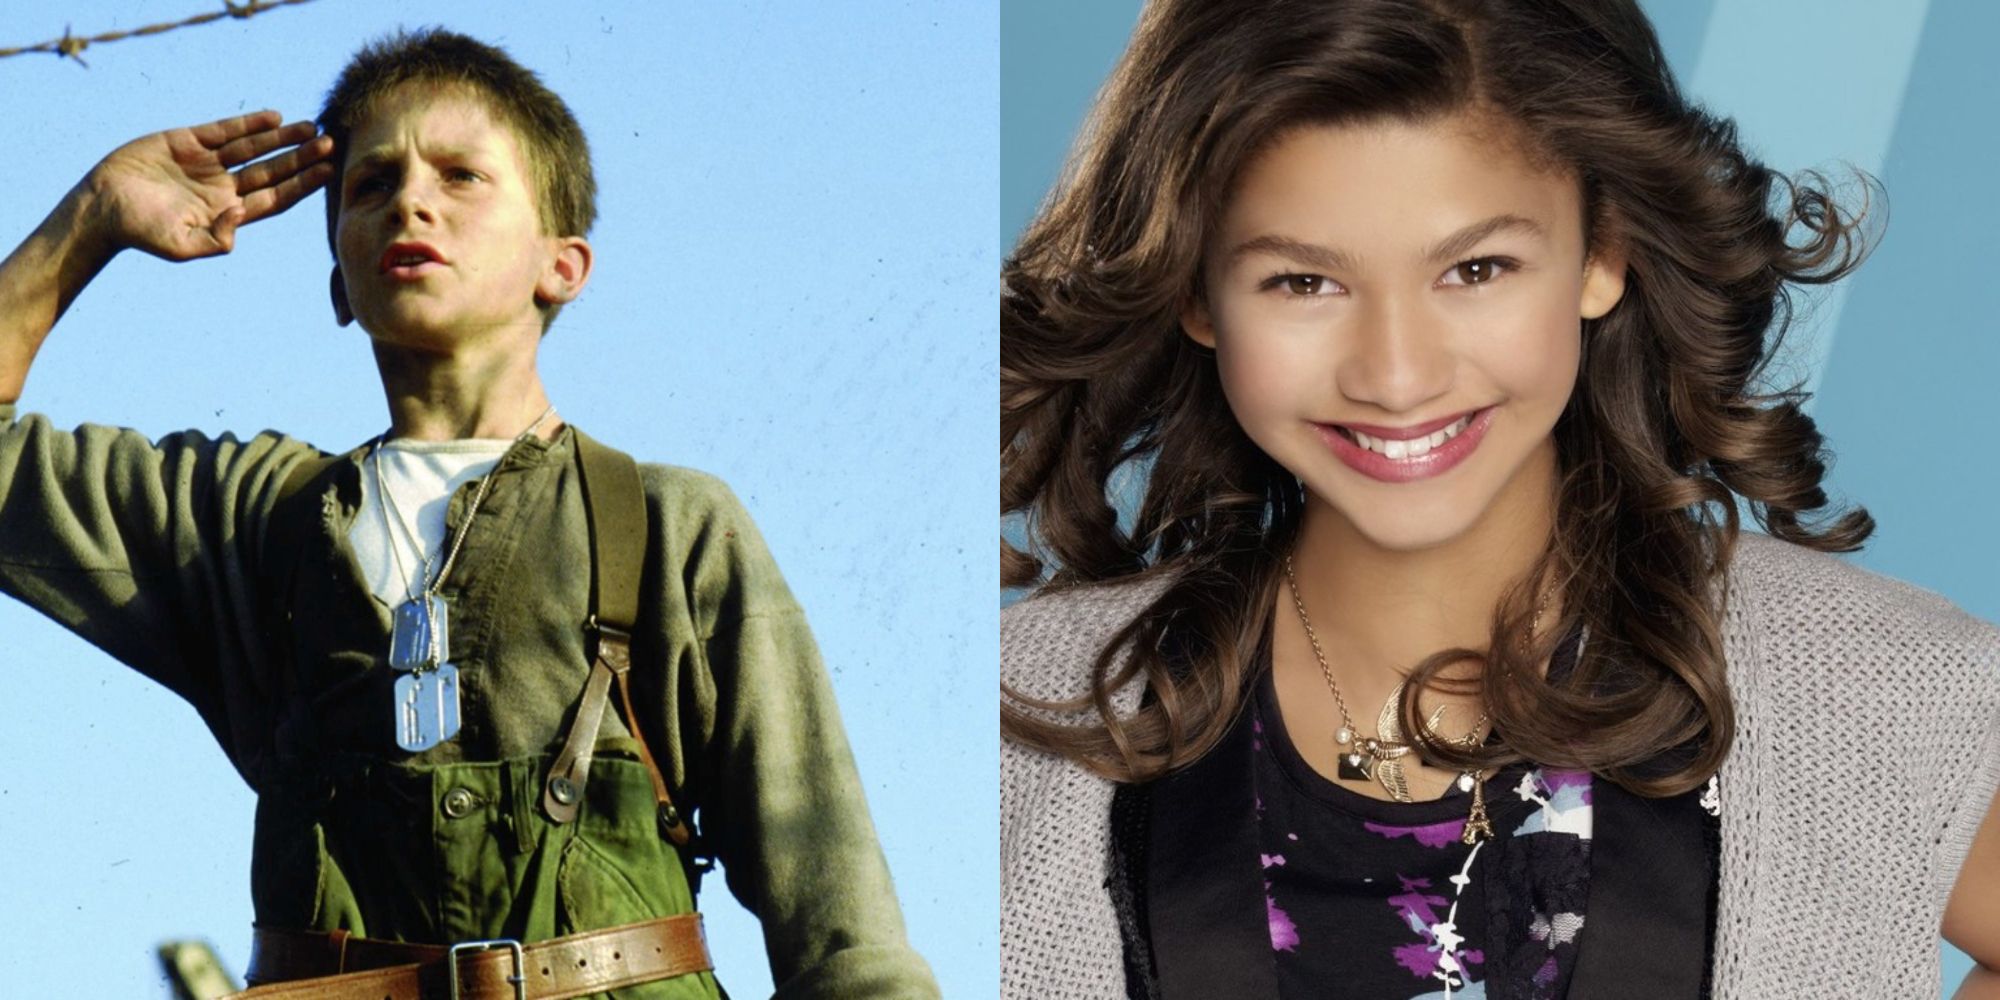 Split images of Christian Bale in Empire of the Sun and Zendaya in Shake It Up